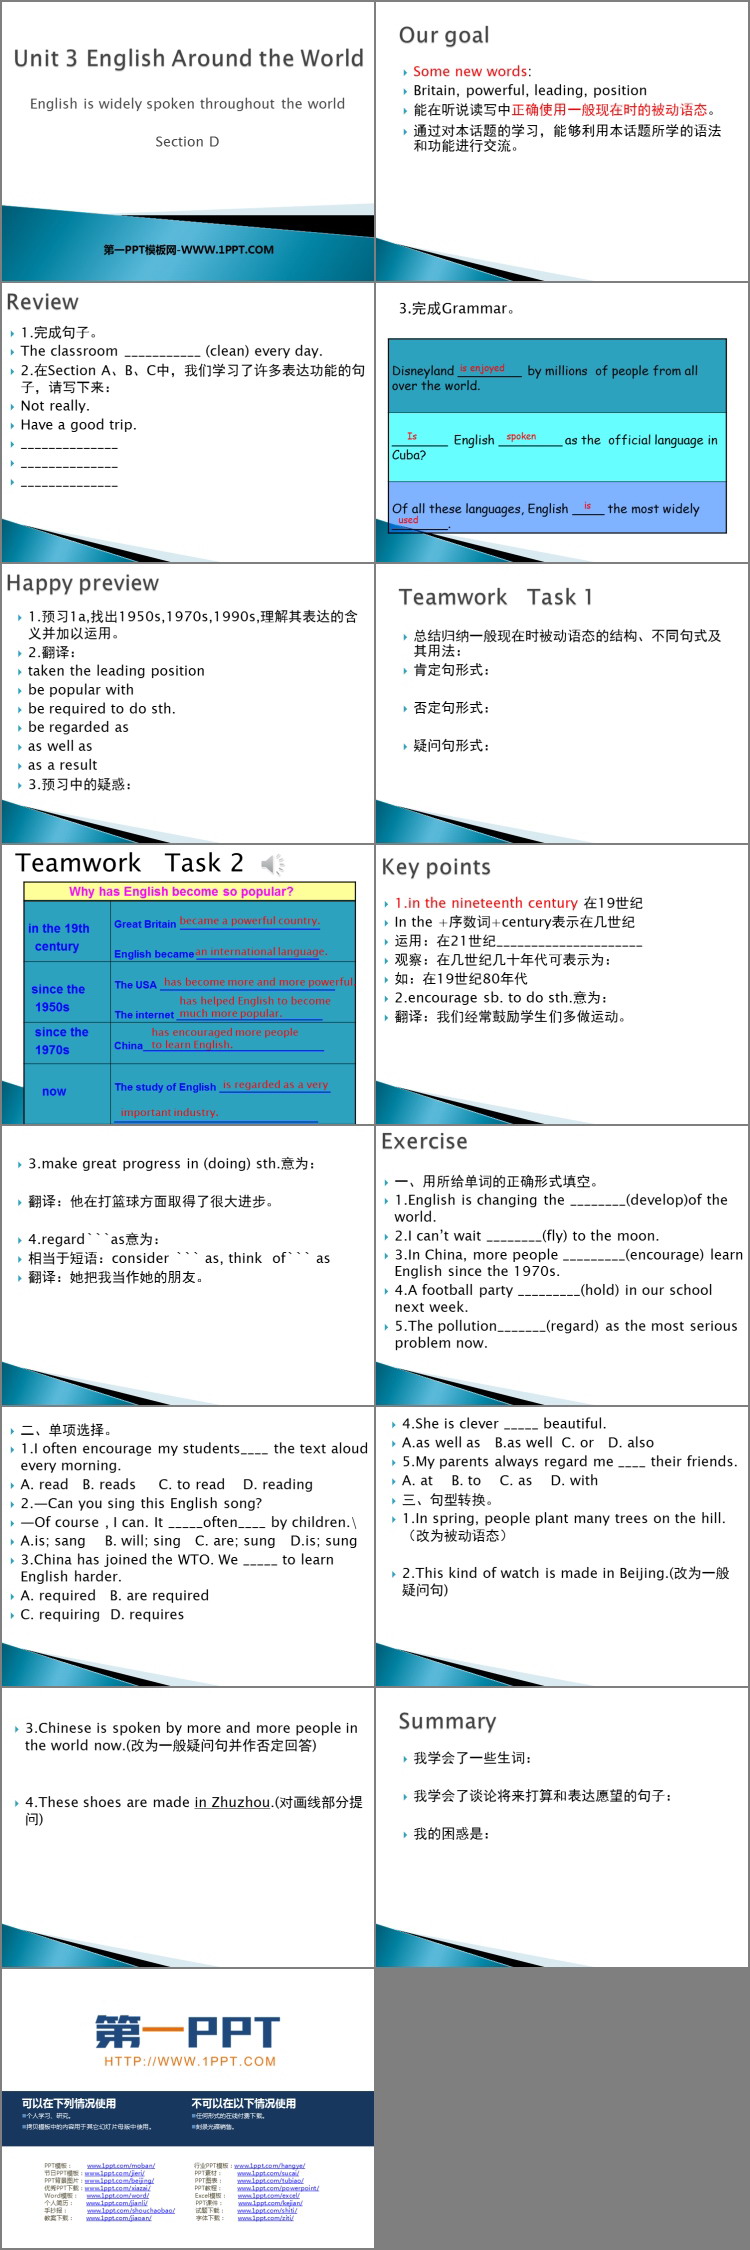 《English is widely spoken throughout the world》SectionD PPT课件-预览图02